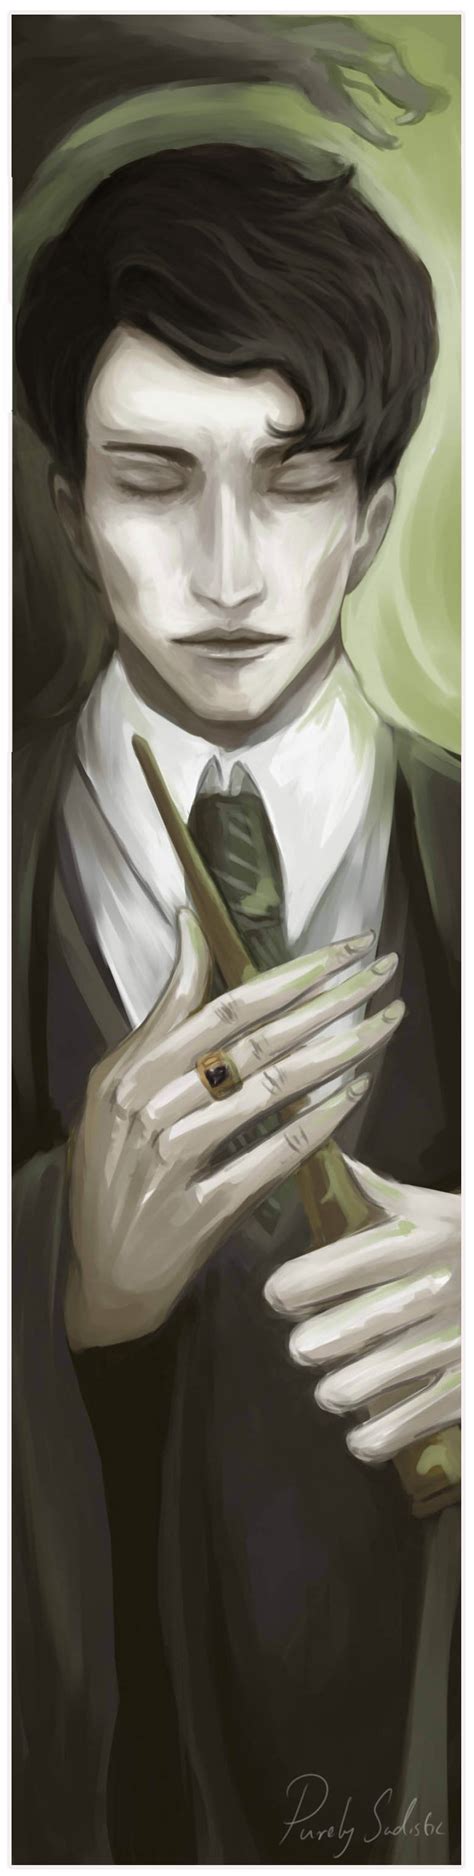 Tom Riddle By Hermy One On Deviantart